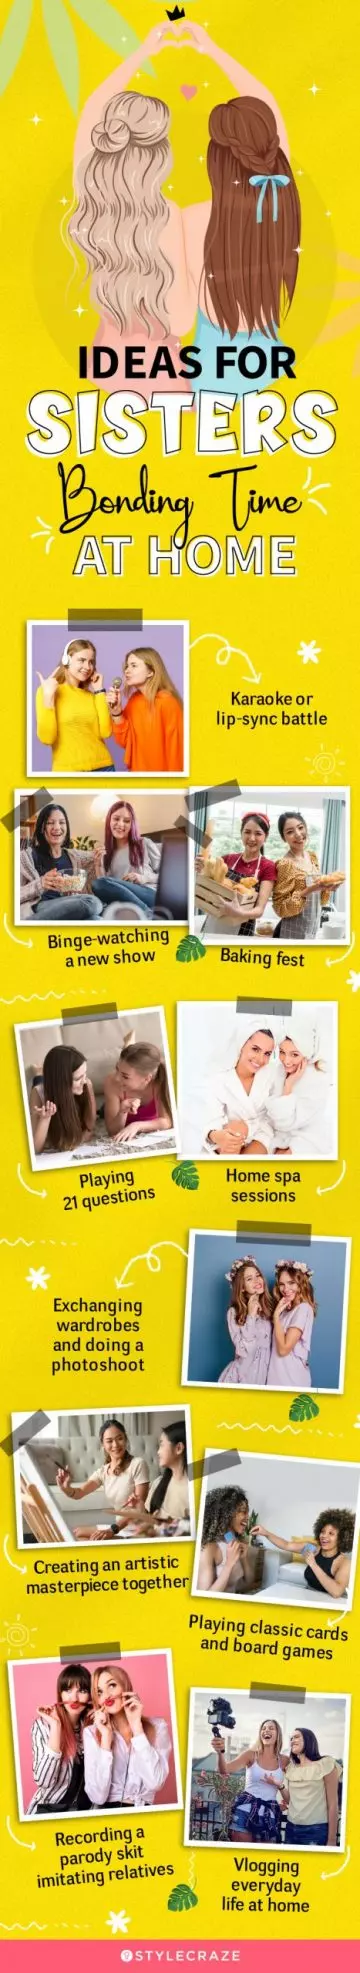 ideas for sisters bonding time at home (infographic)